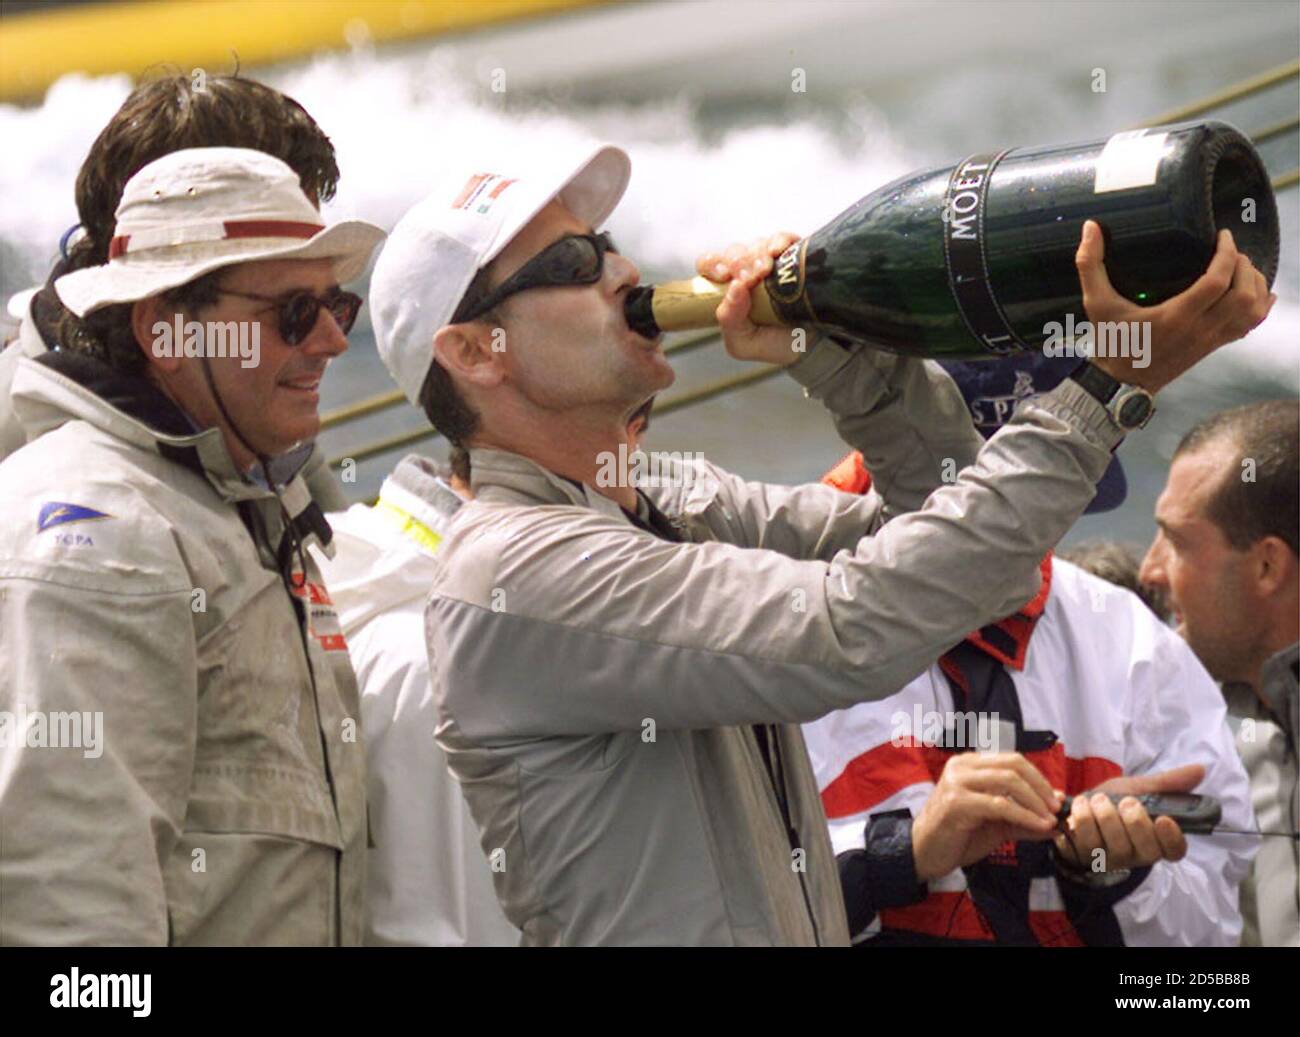 The skipper of Italian yacht Prada Francesco de Angelis (R) drinks  champagne after he and his crew defeated AmericaOne to win the final race  of the Louis Vuitton Cup finals on the